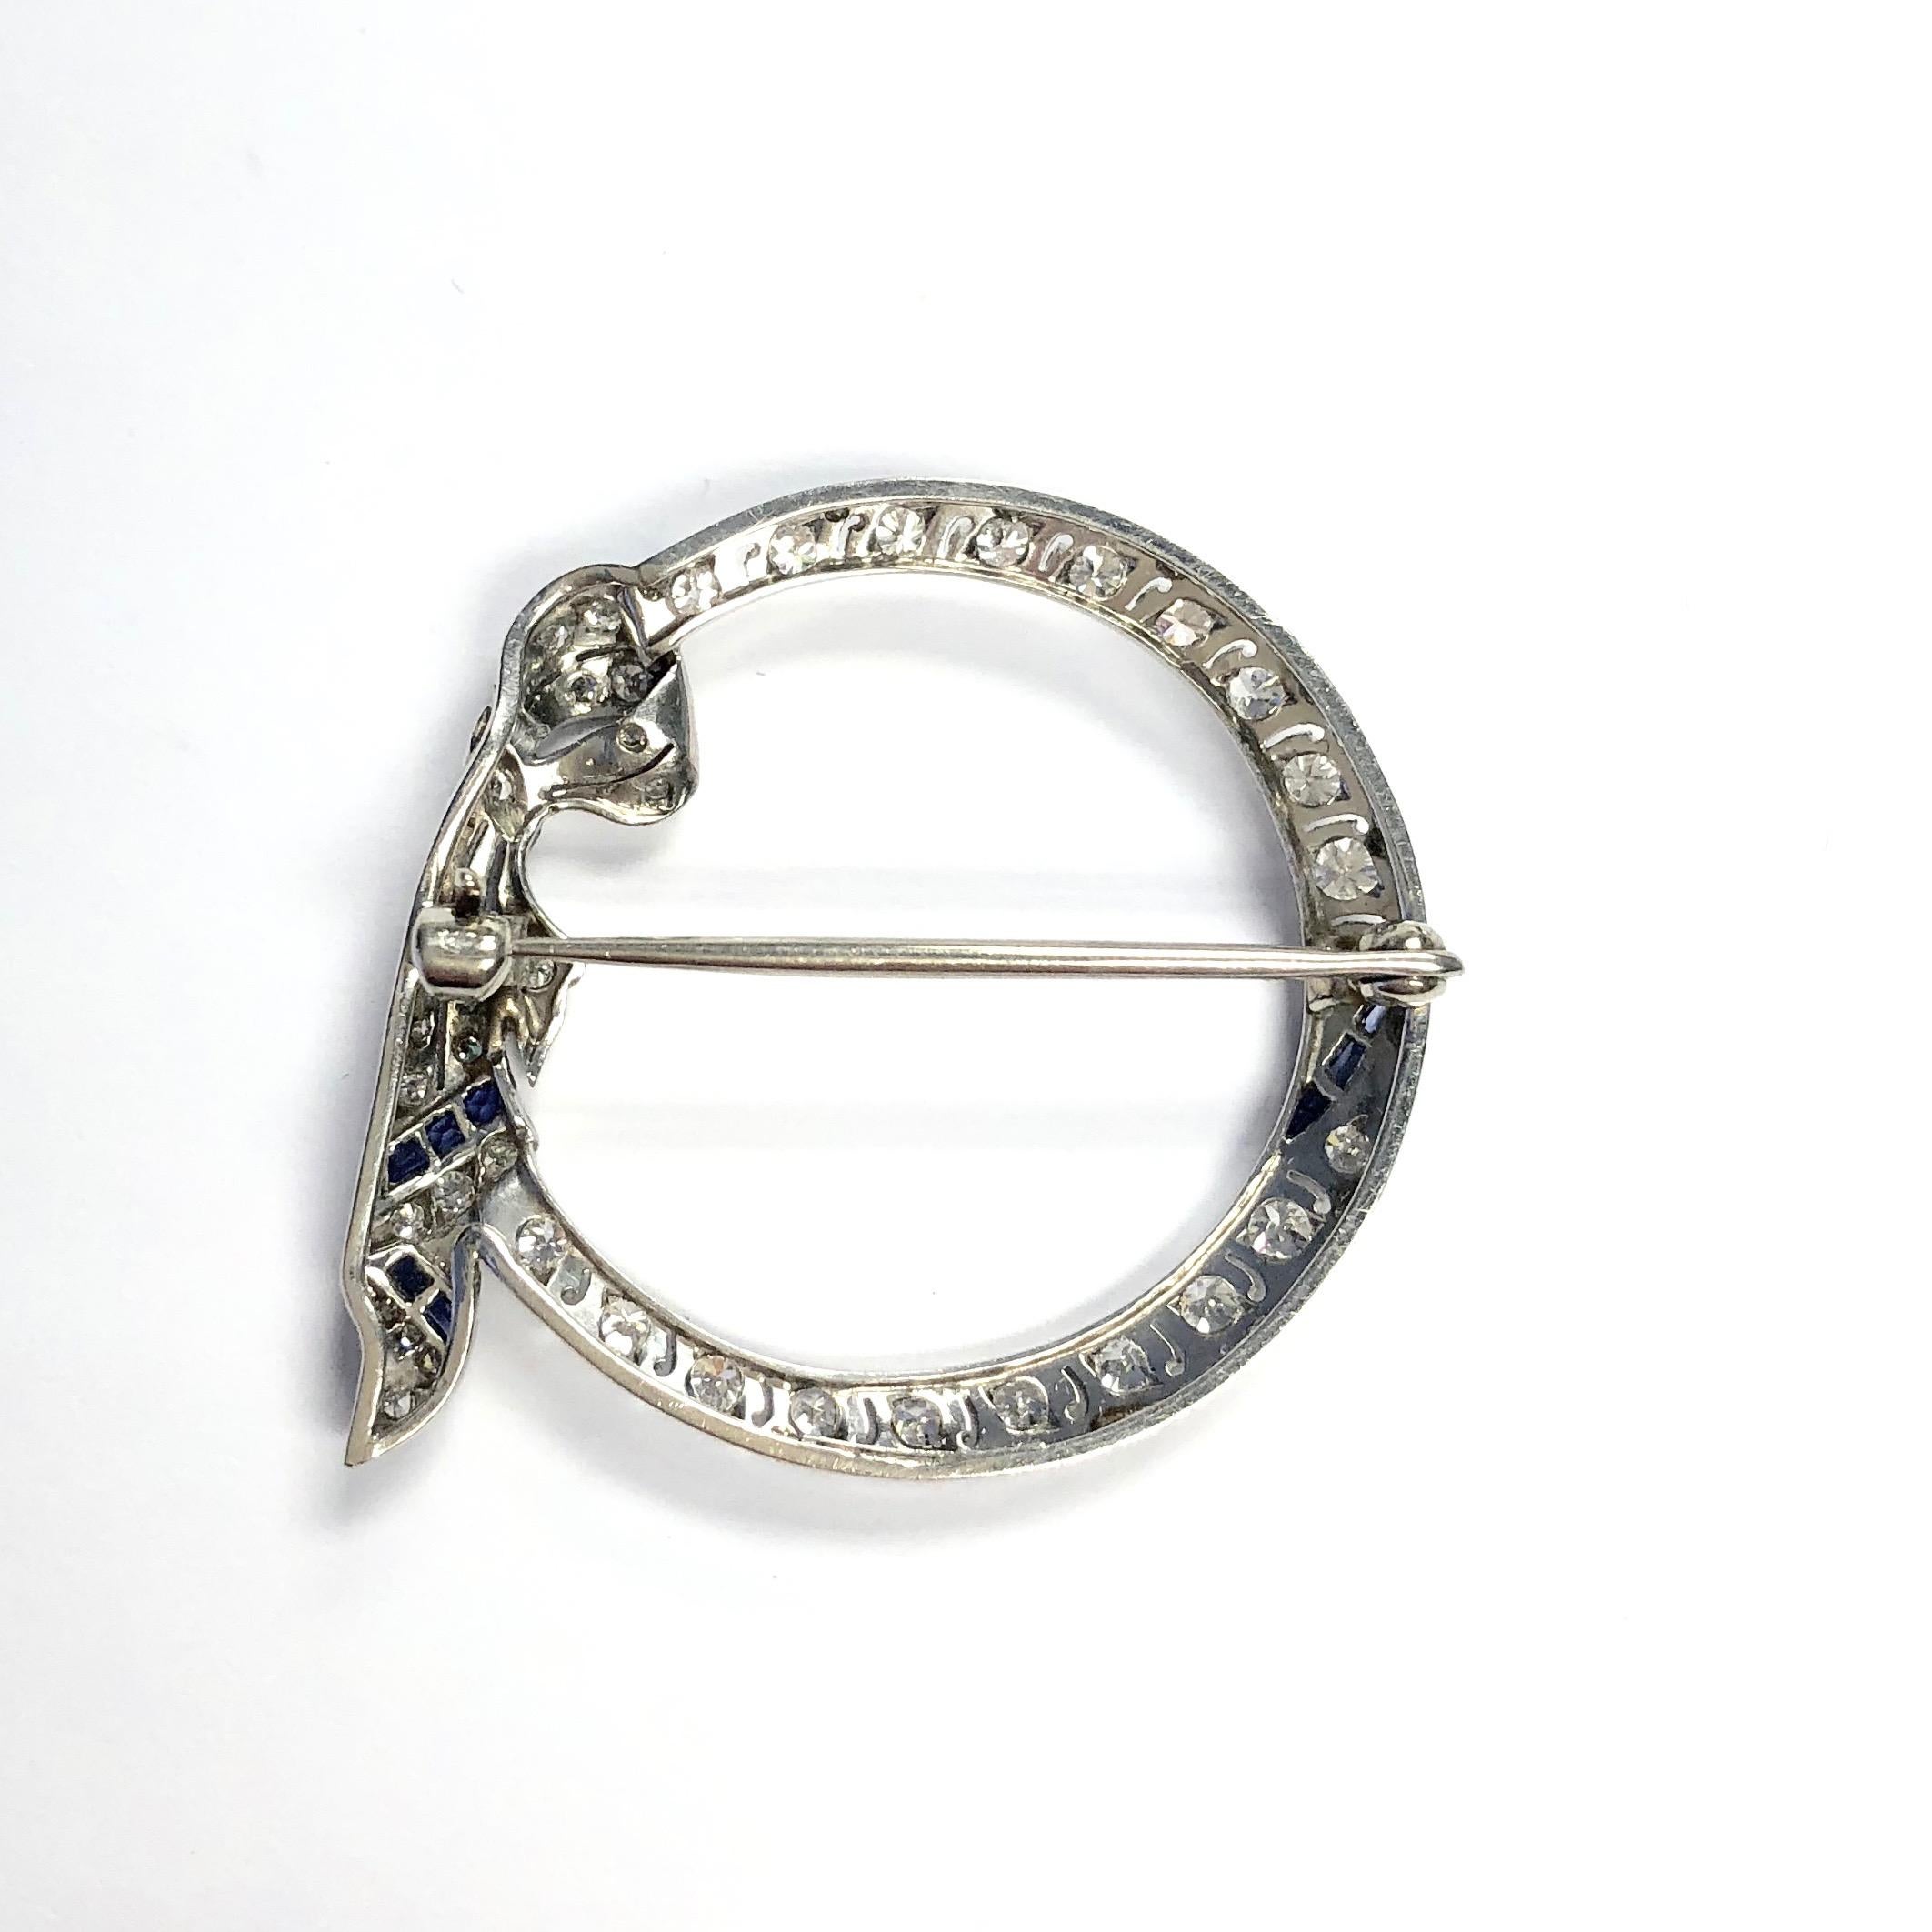 Classic Platinum Art Deco circle ribbon brooch set with 43 old european and single cut diamonds and calibre cut sapphire accents.
Approximate total diamond weight: 1.00ct. Color: G-H, Clarity: VS1-VS2
The pin measures 1 3/16 